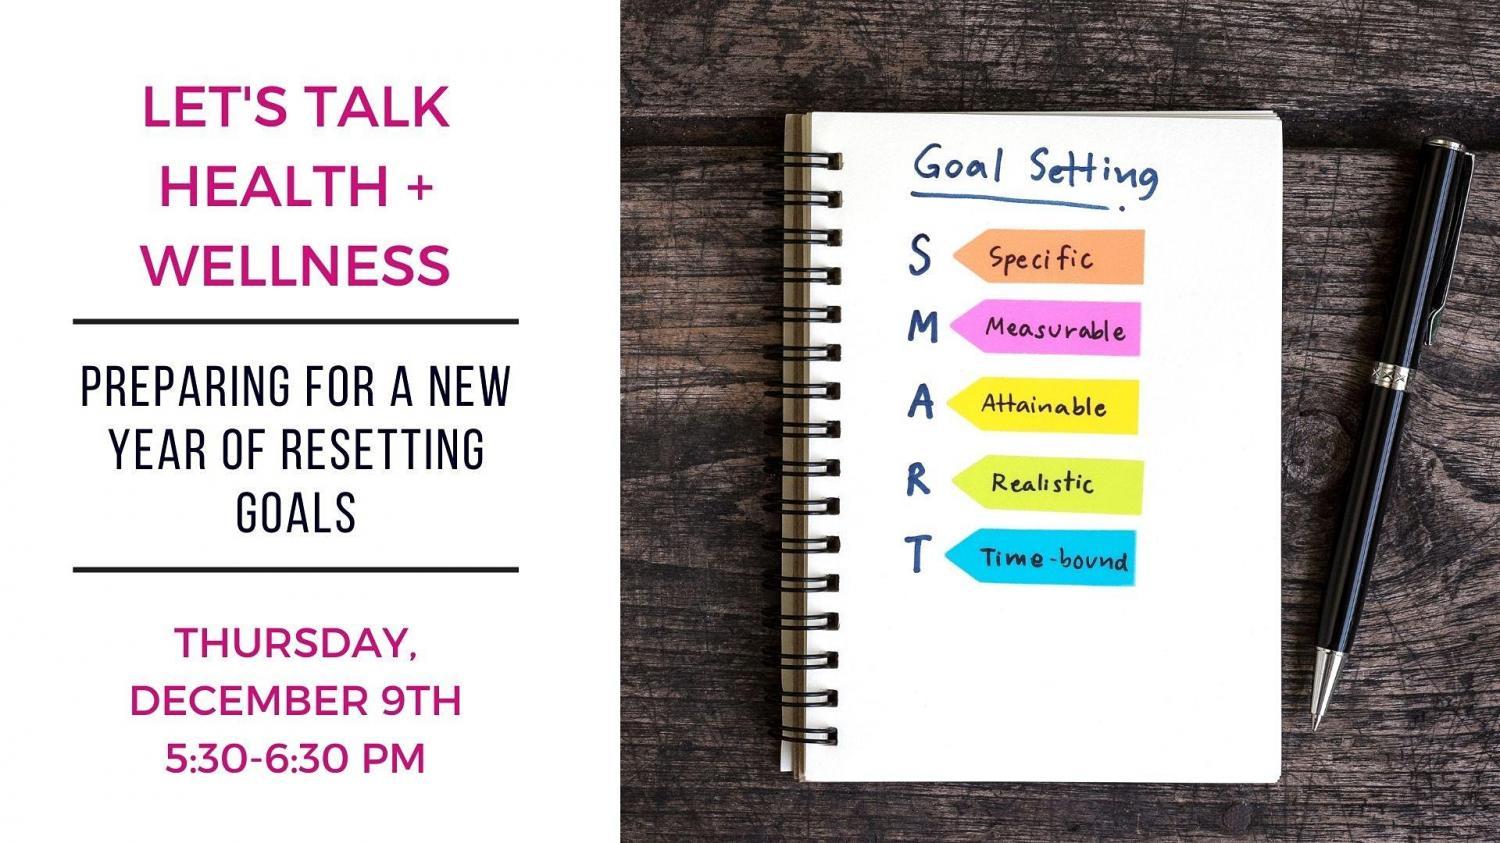 Free Seminar: Preparing for a New Year of Resetting Goals